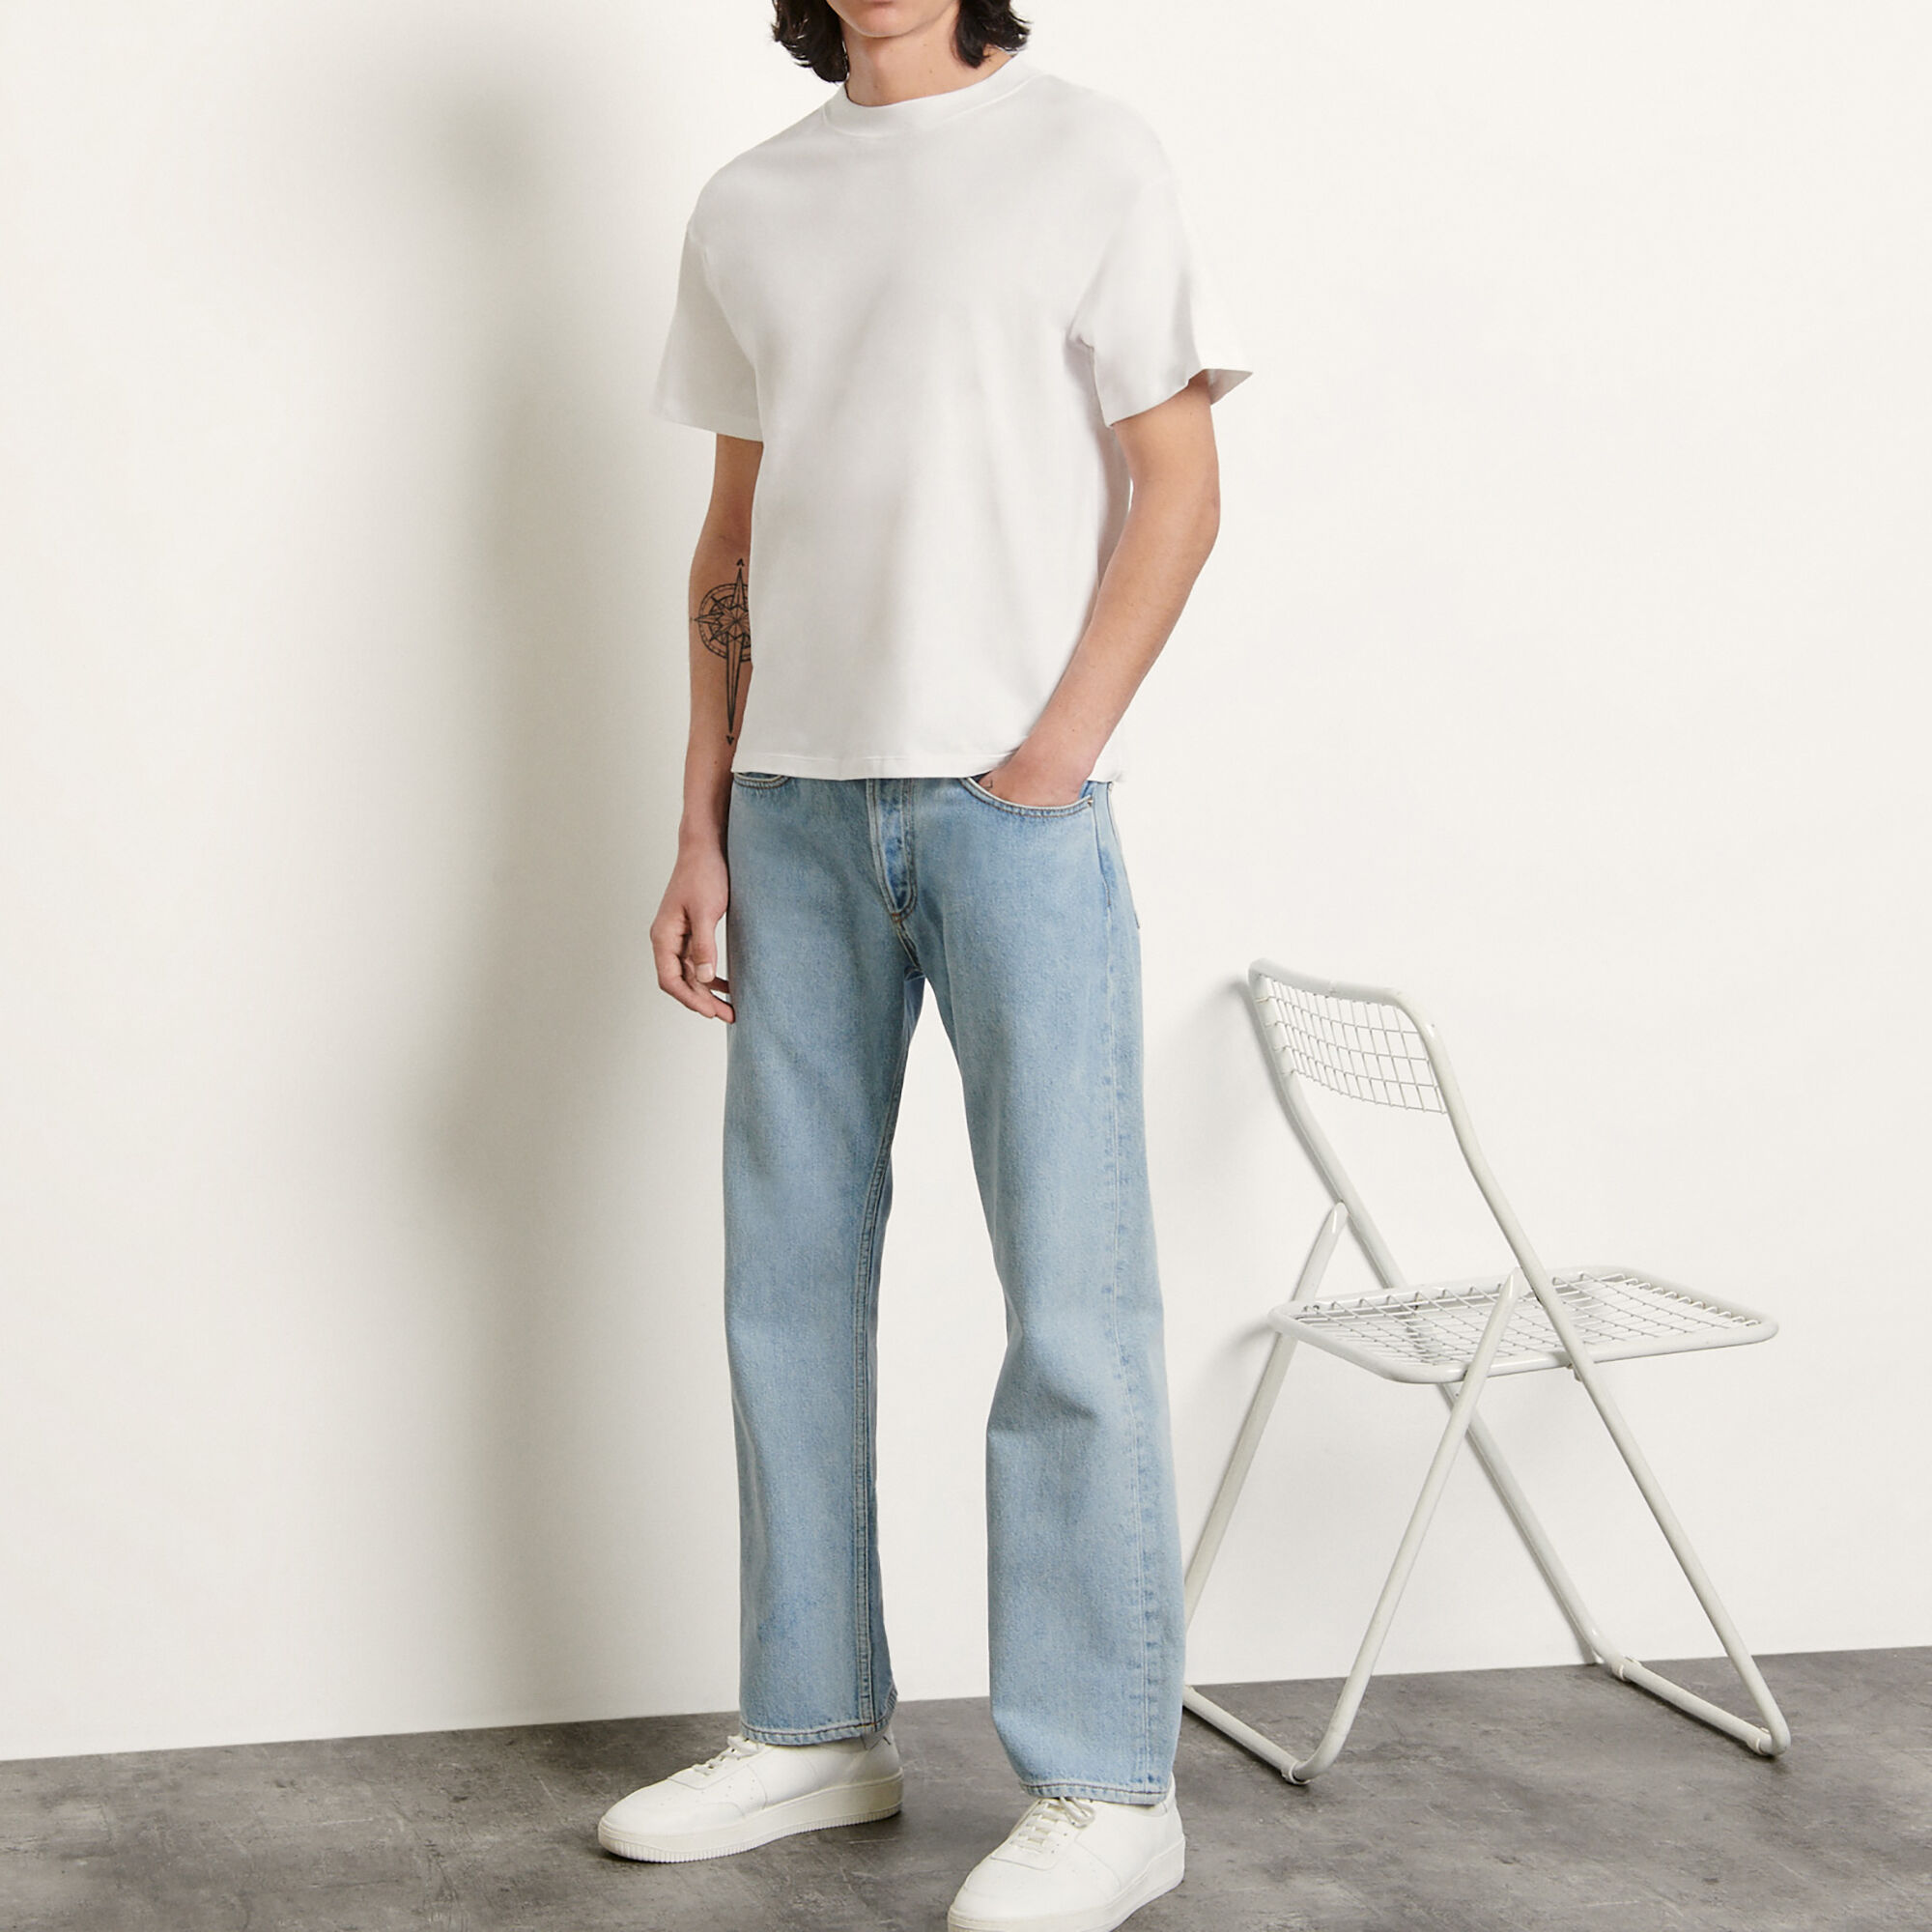 Sandro Brushed Cotton T-shirt In White